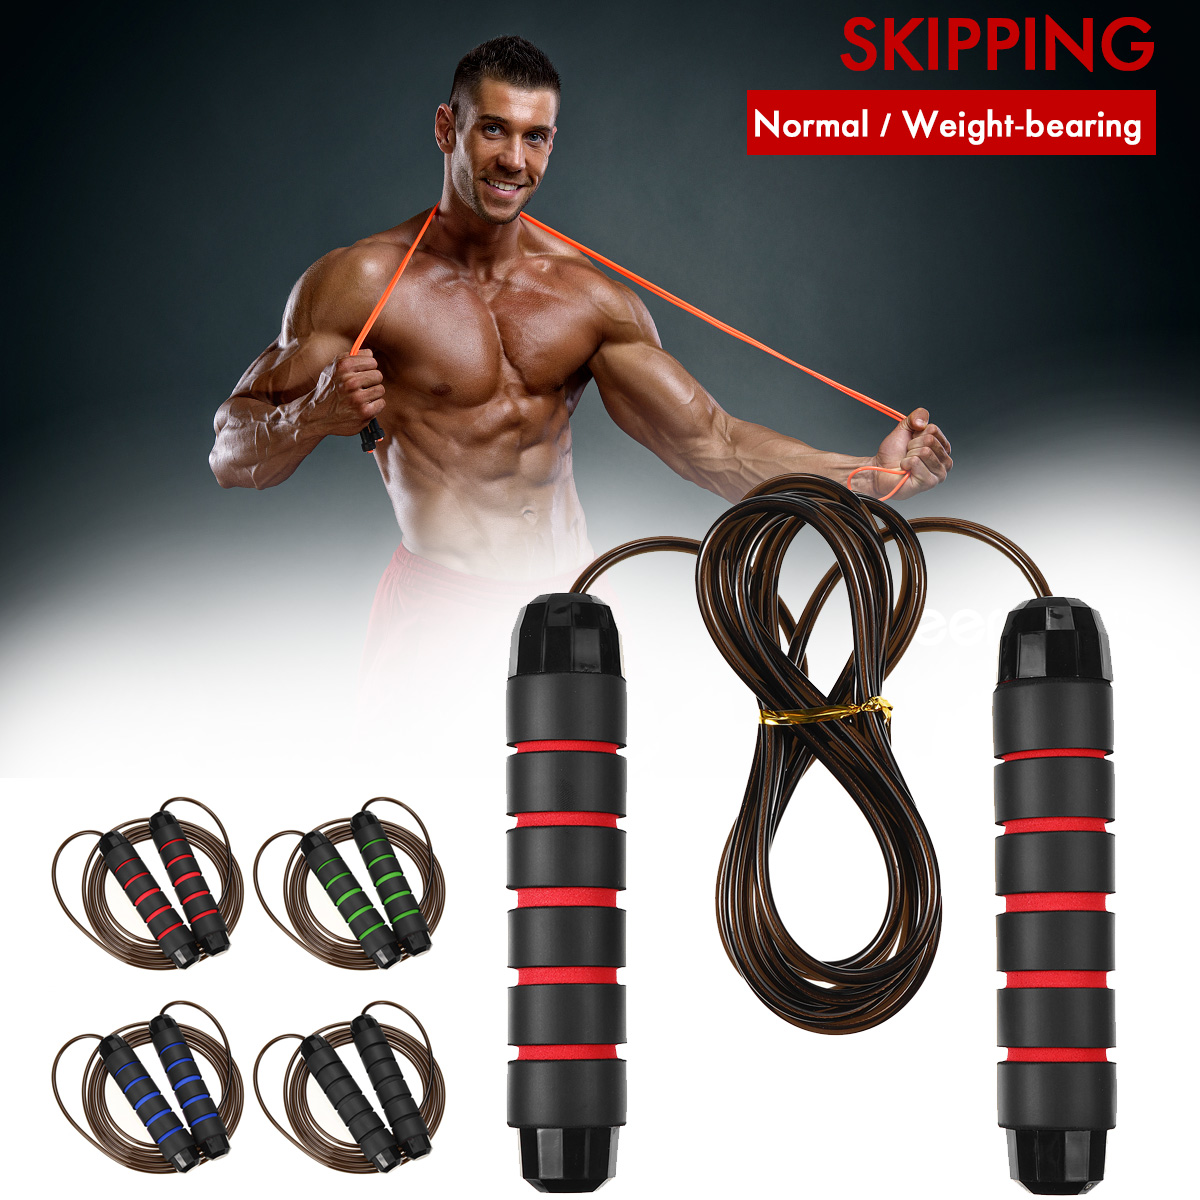 Boxing/Gym/Jumping/Speed/Exercise/Fitness adjustable length Skipping Rope Mix 